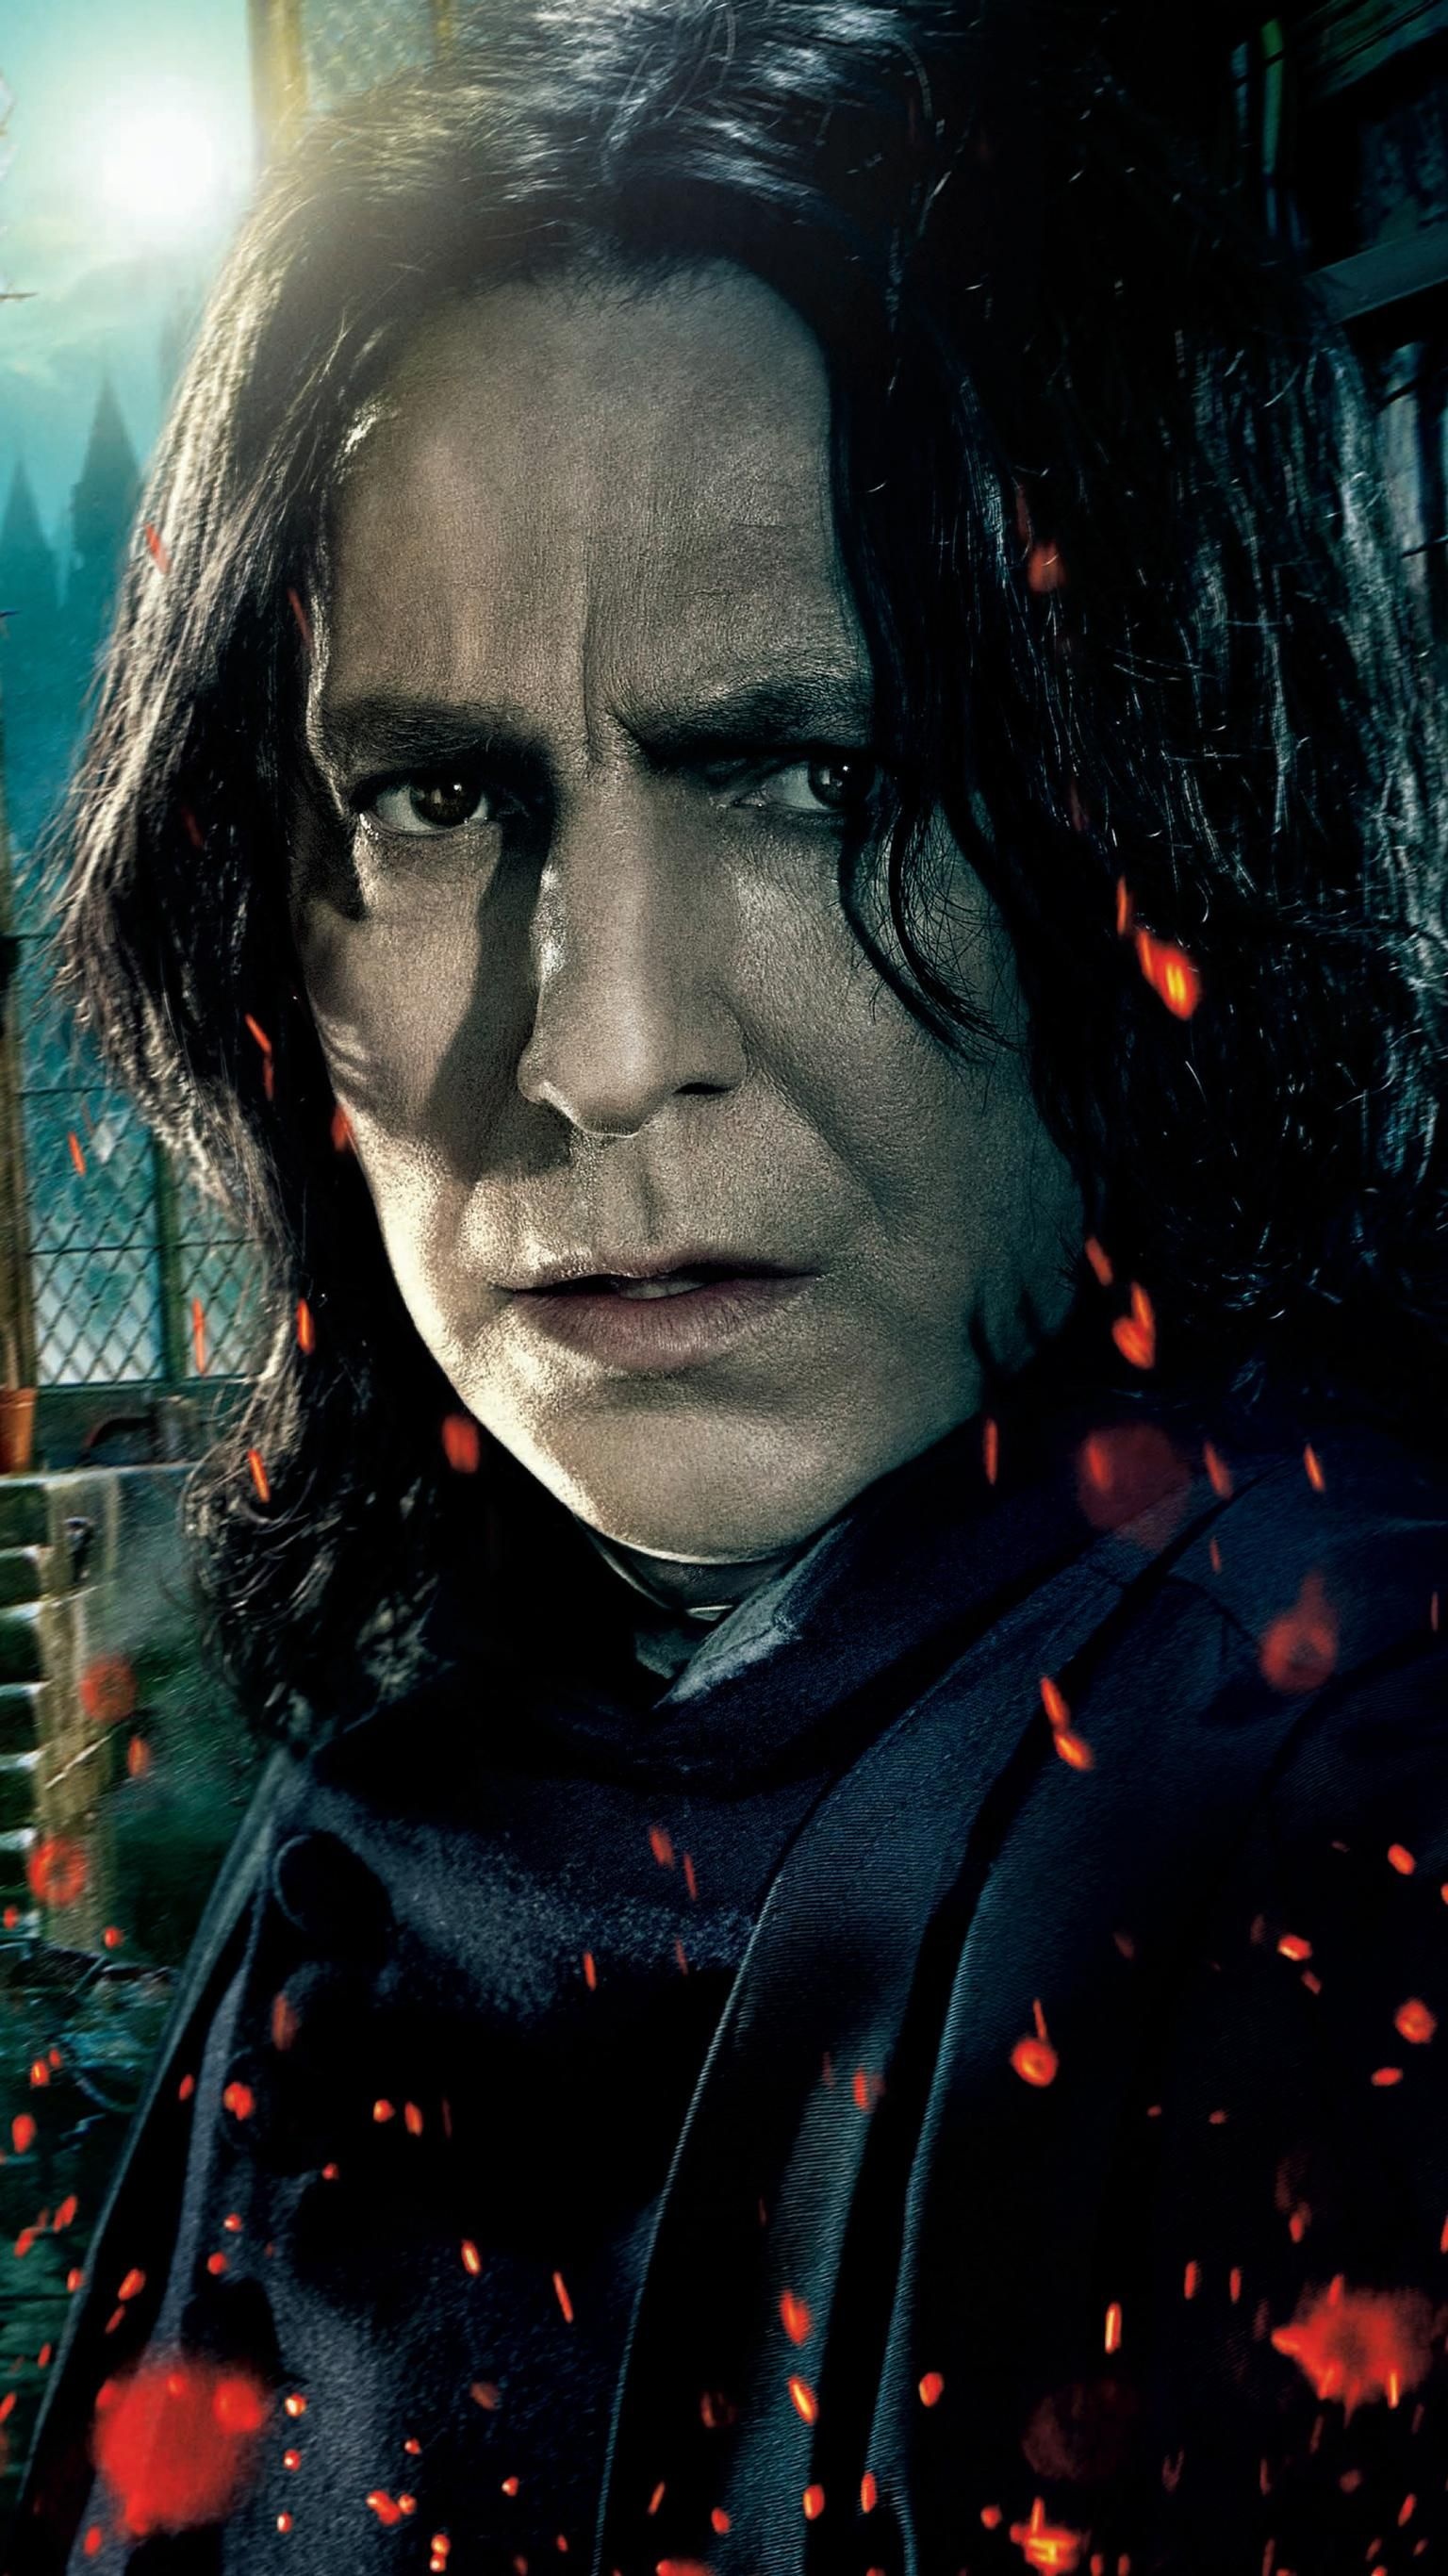 Severus Snape: Alan Rickman portrayed the character in all eight Harry Potter films. 1540x2740 HD Wallpaper.